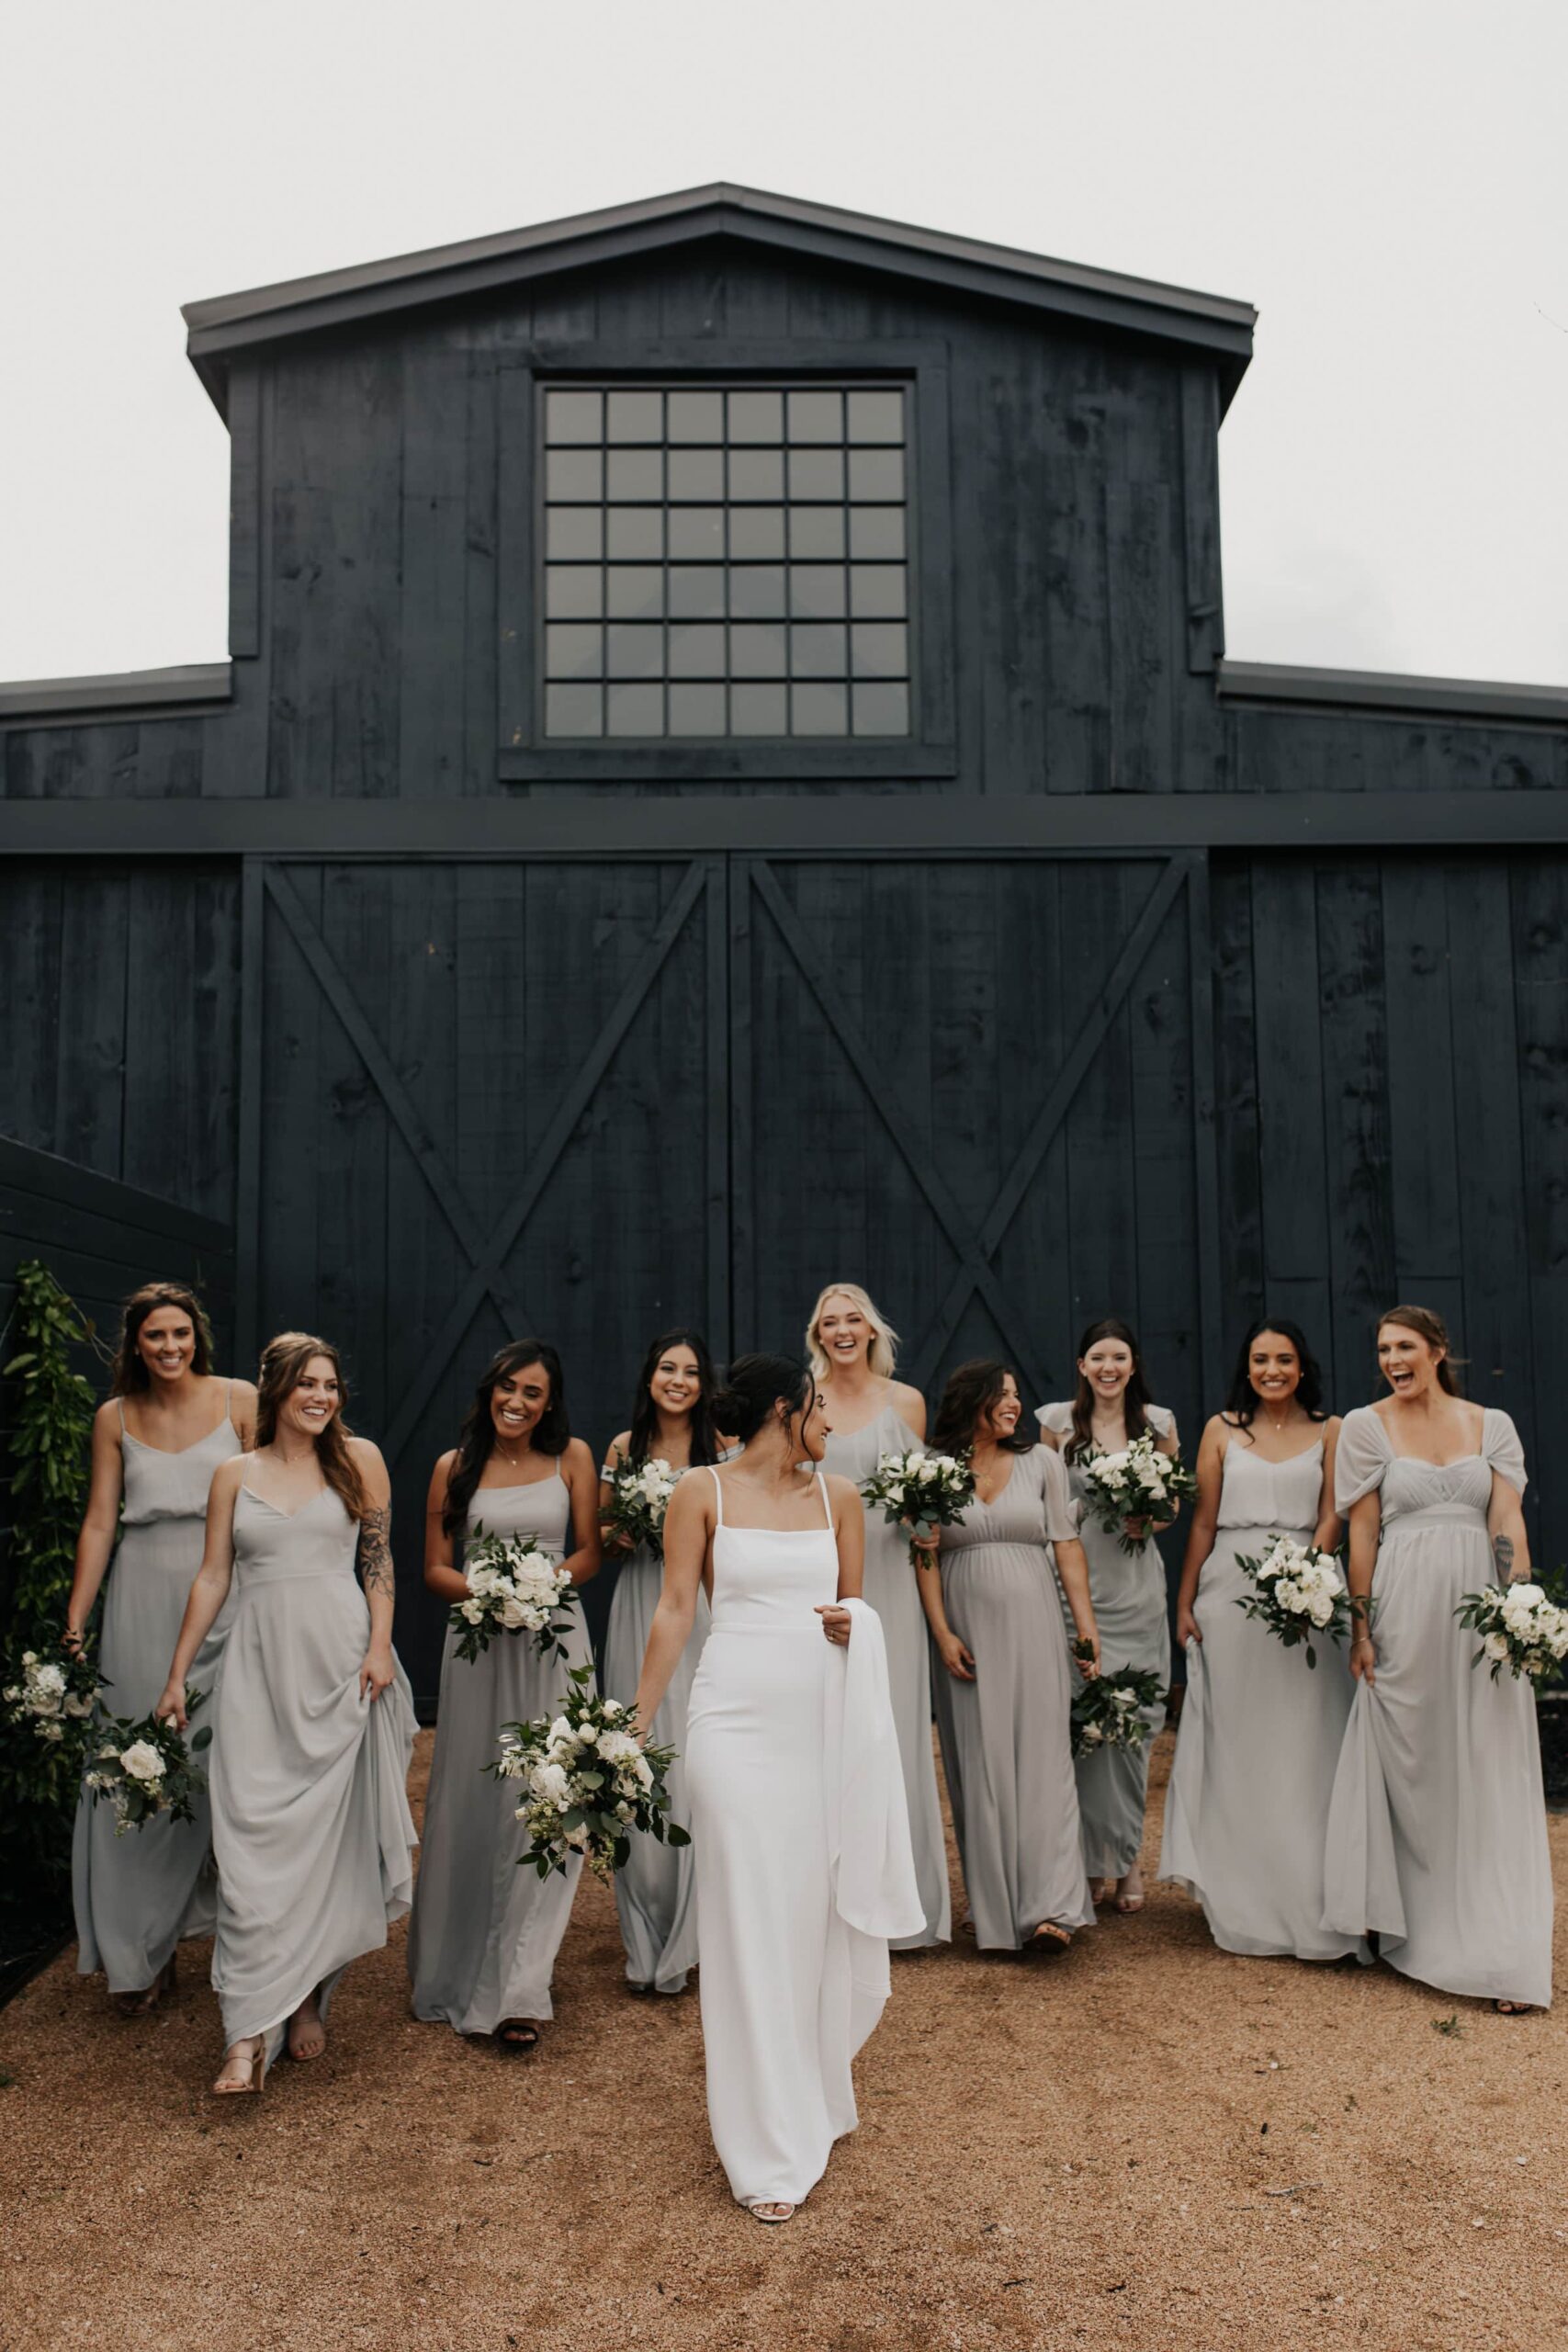 Sophia and Grant's Wedding at Two Wishes Ranch